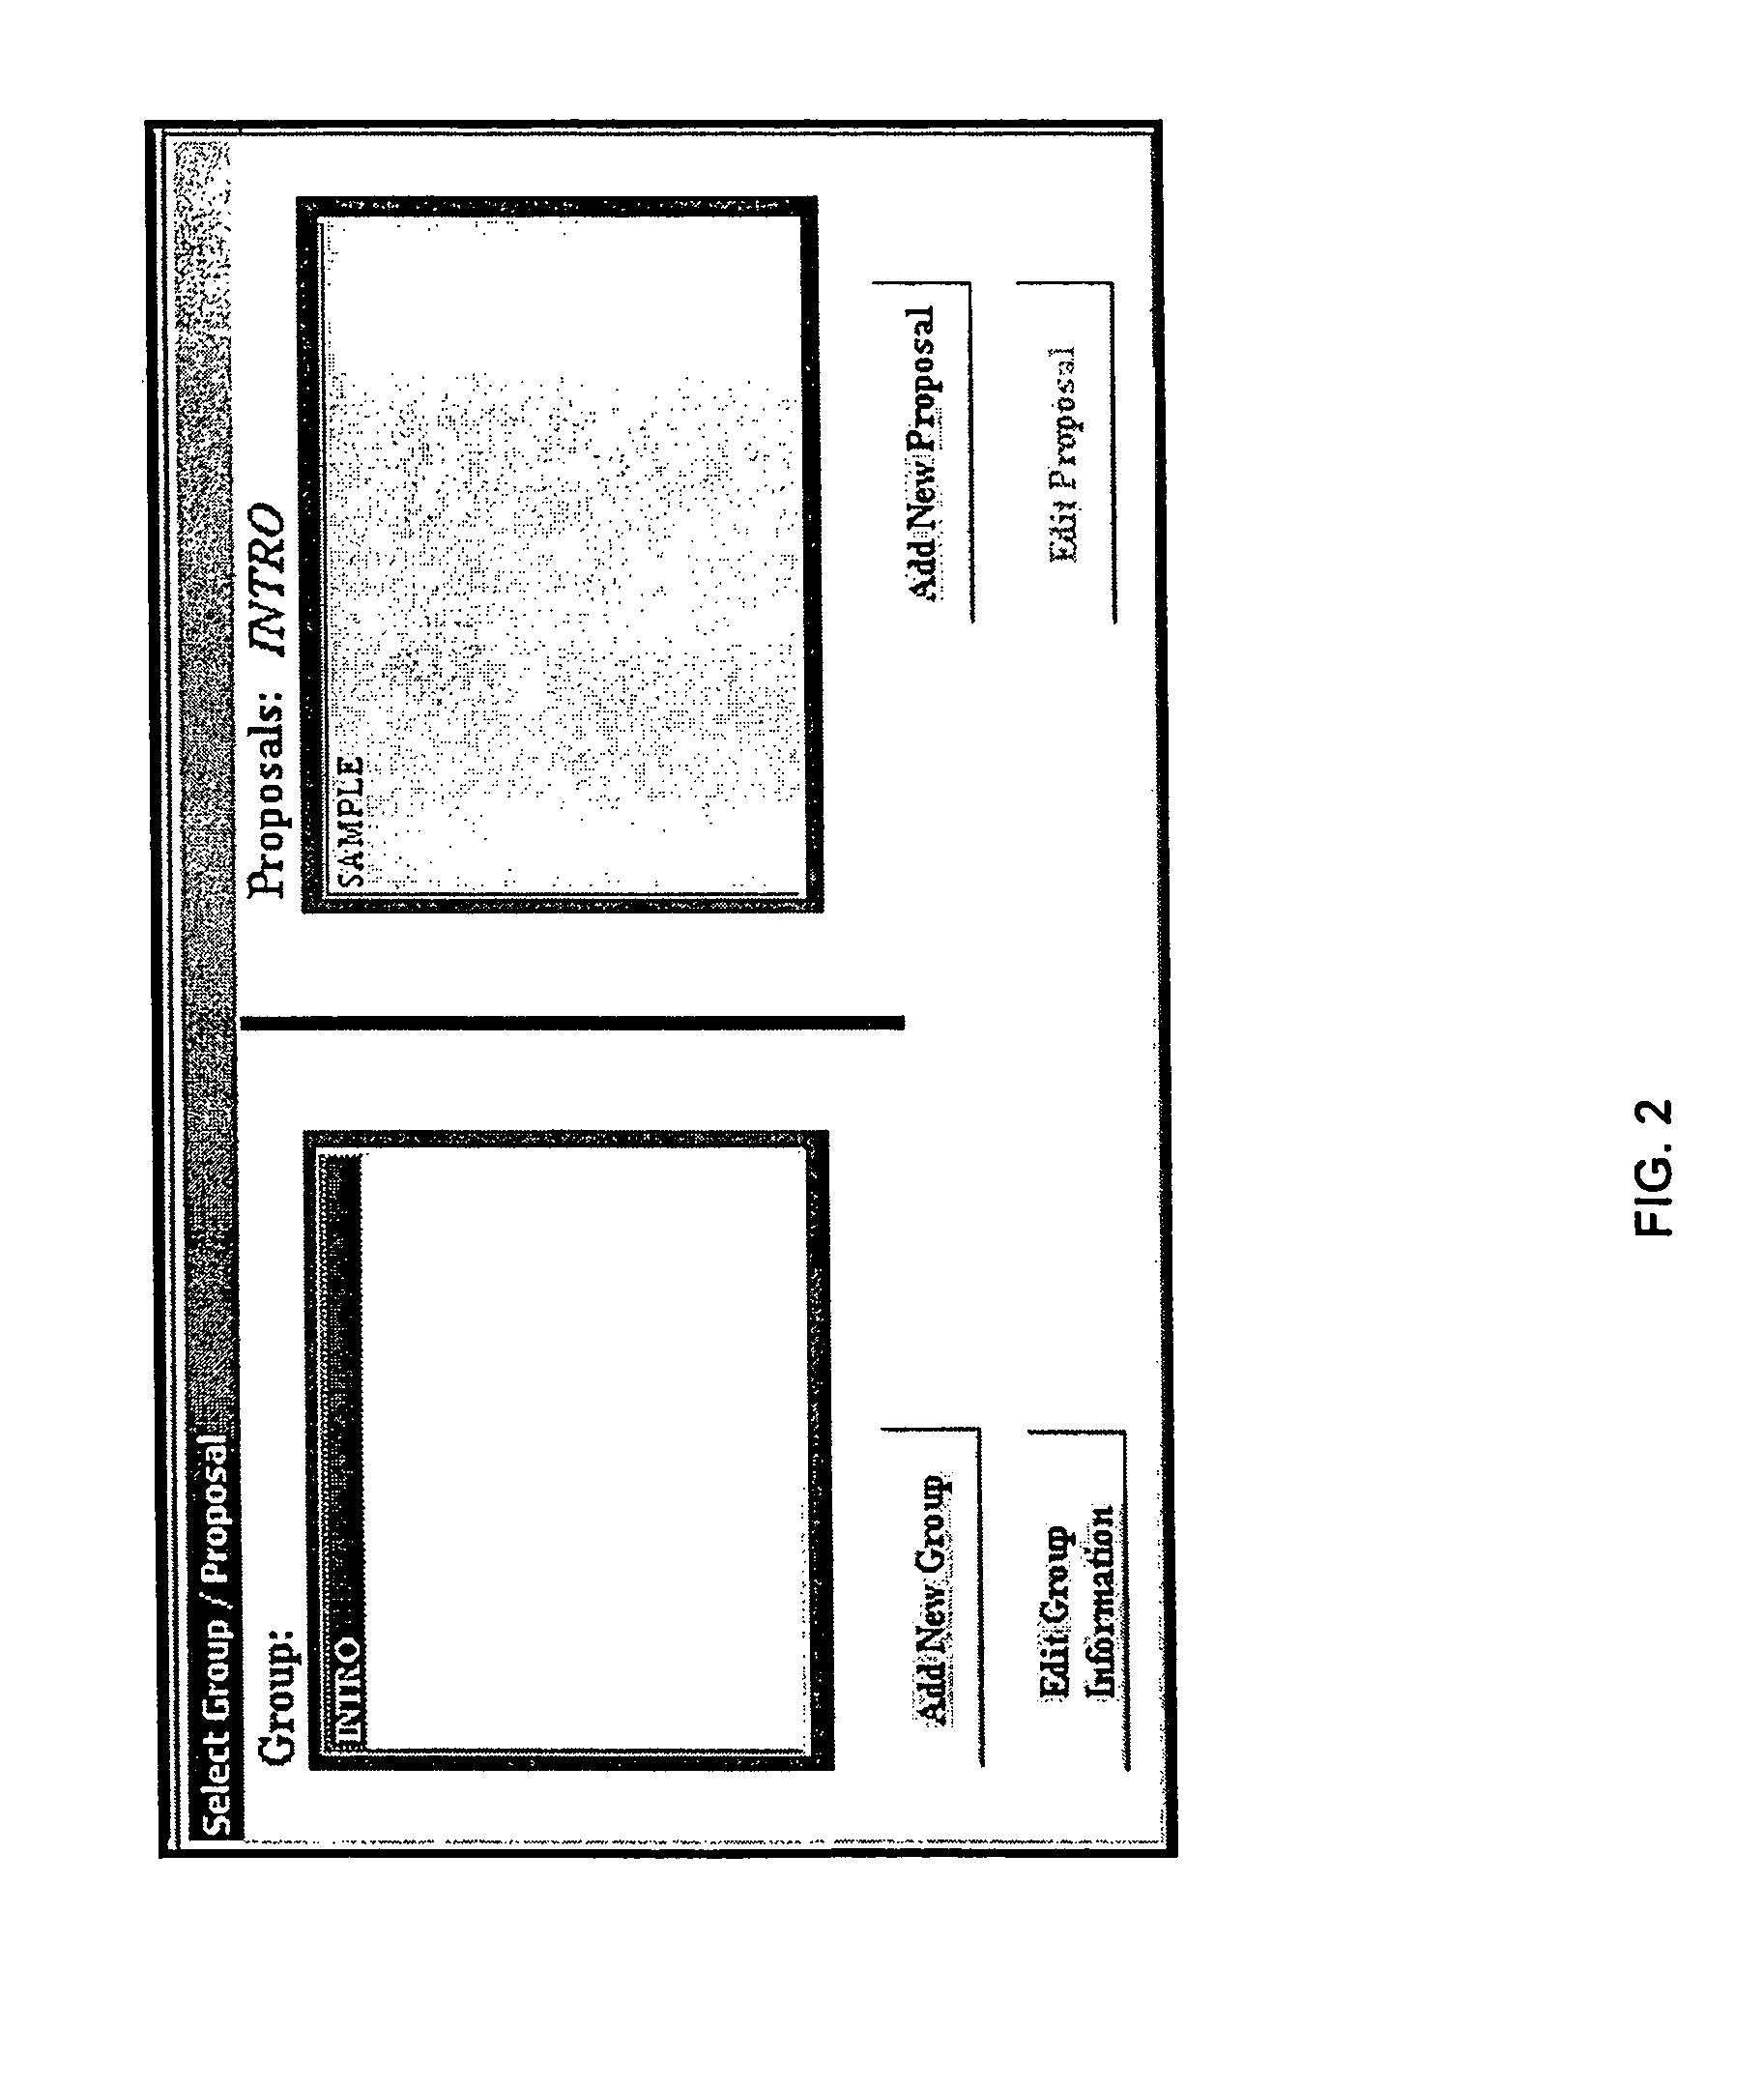 System and methods for tracking the relative interests of the parties to an insurance policy